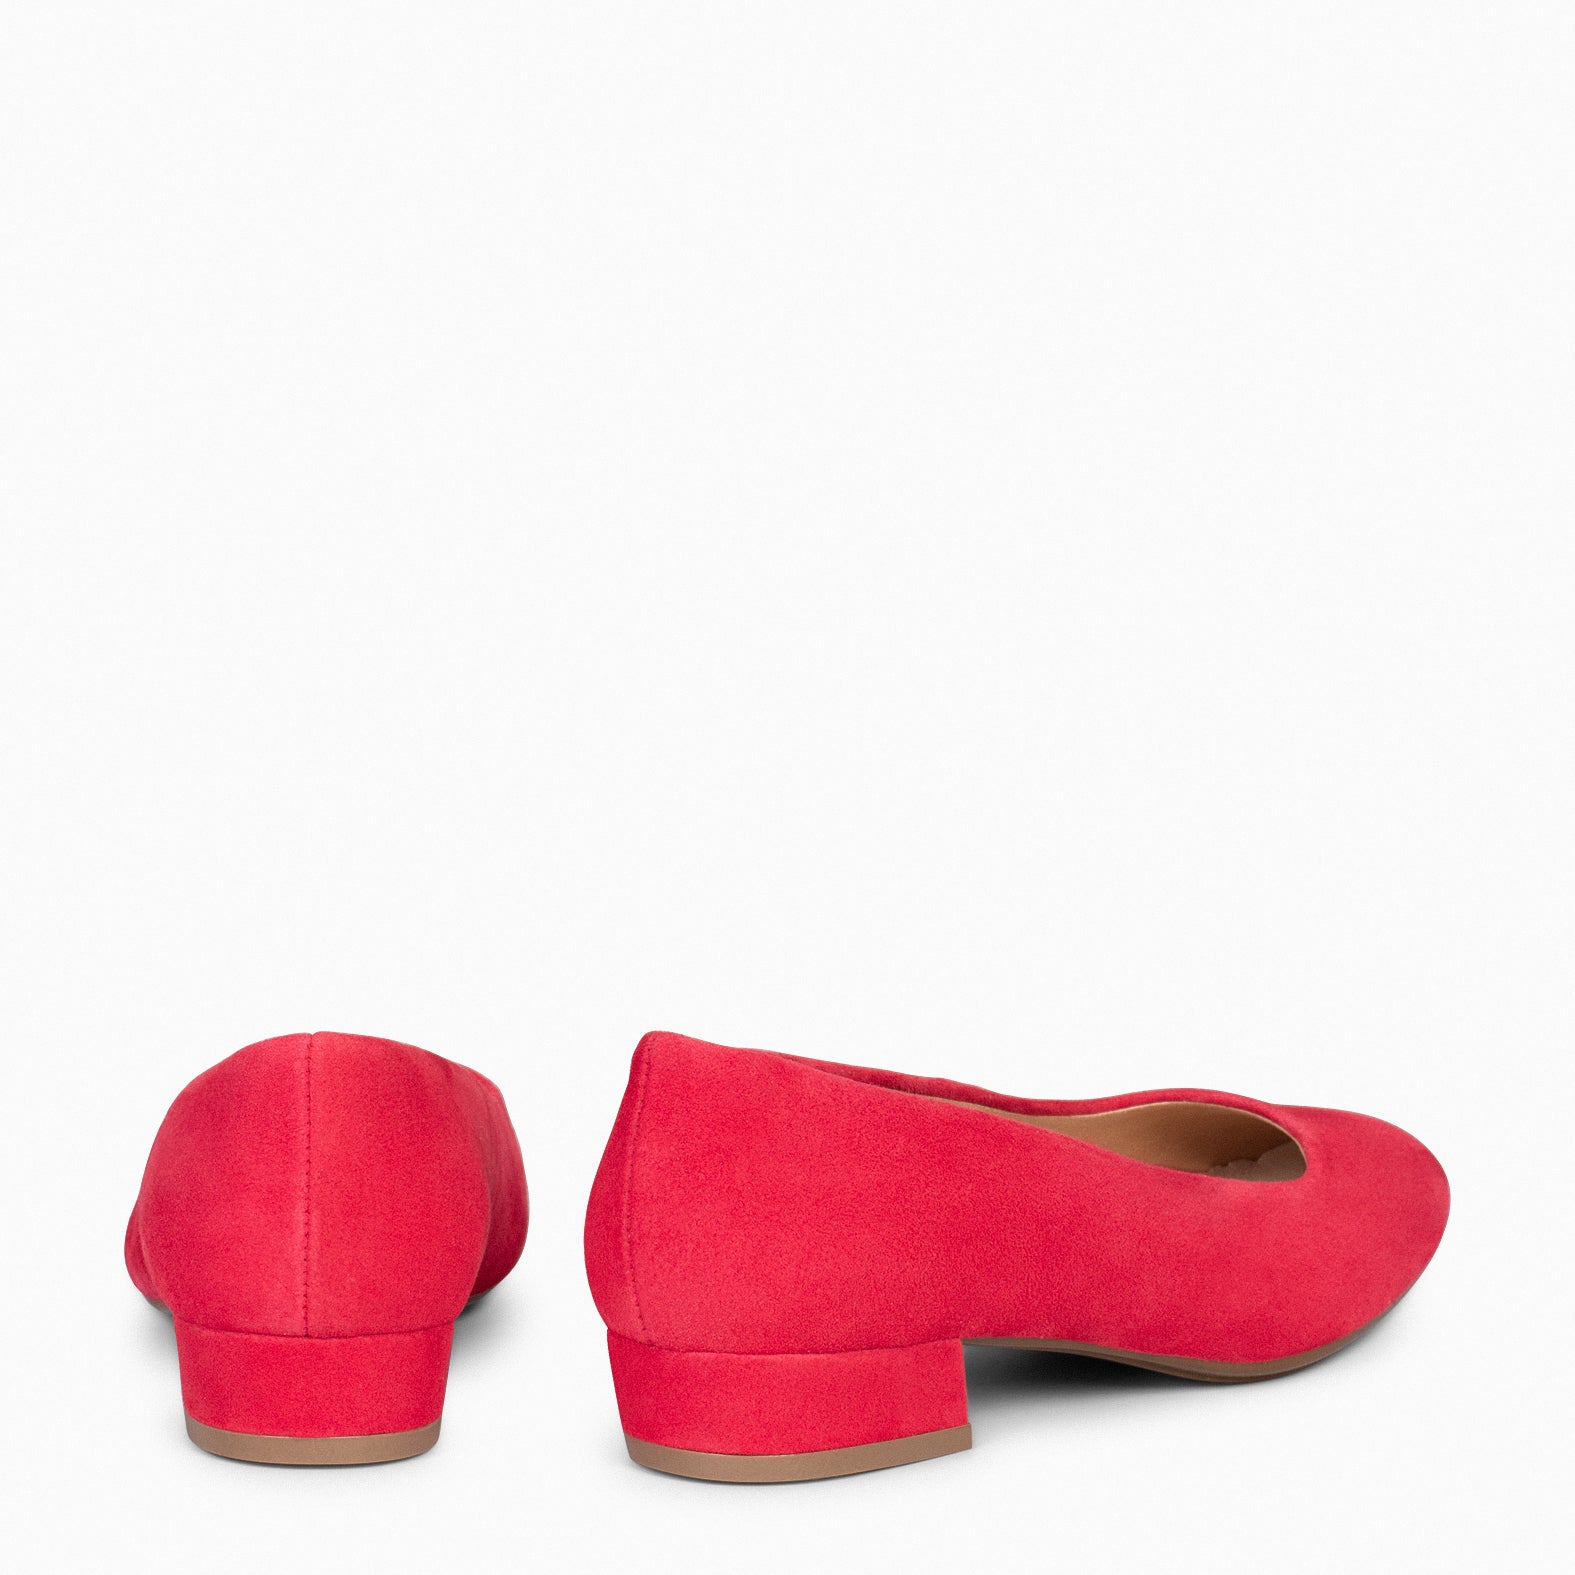 URBAN XS –  RED low-heeled suede shoes